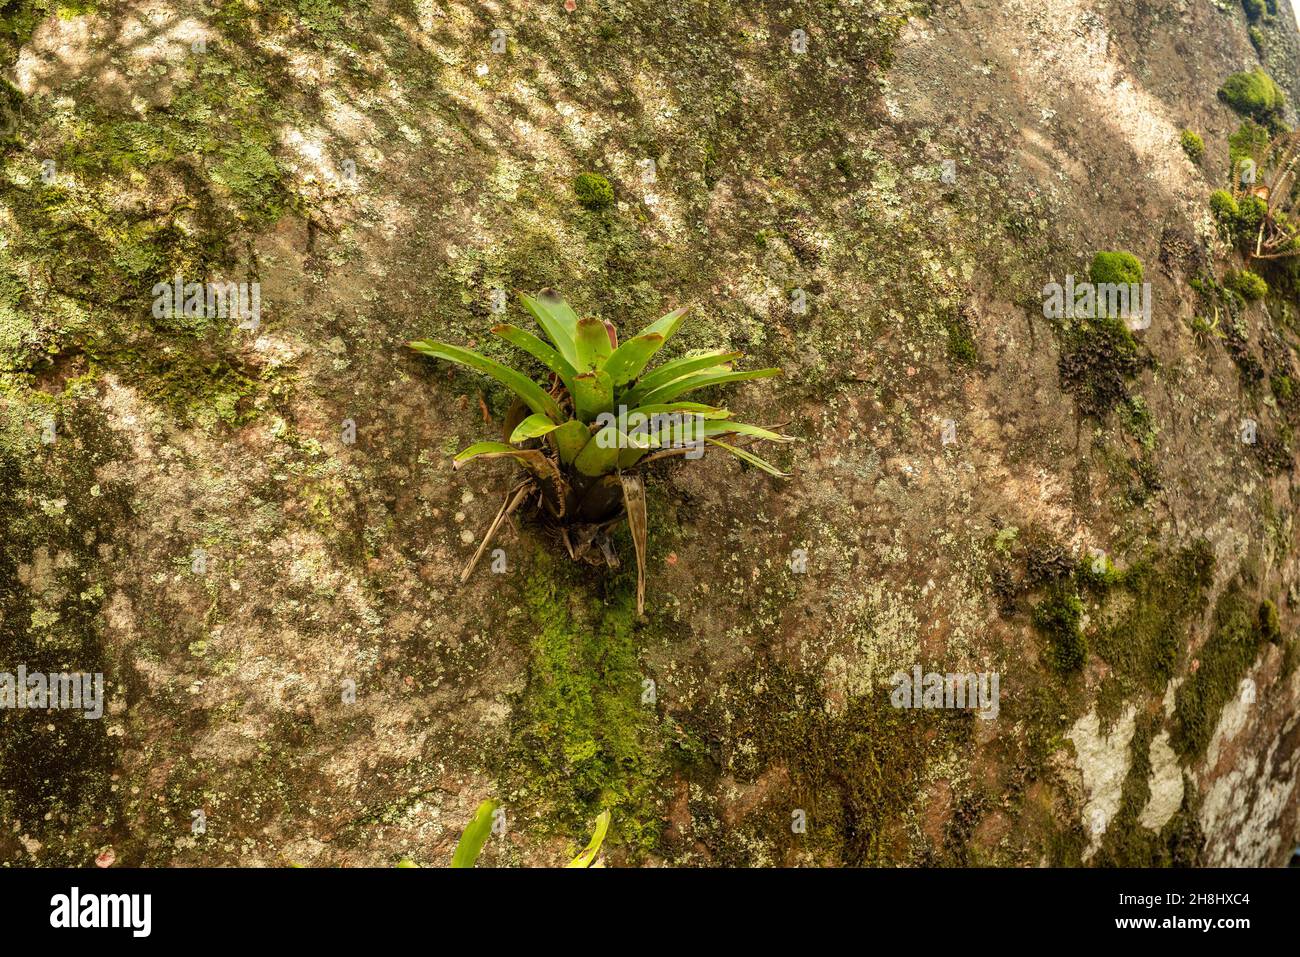 One bromeliad growing on a rock in Petropolis, Brazil, rock covered in lichen and moss, with plenty of copy-space Stock Photo